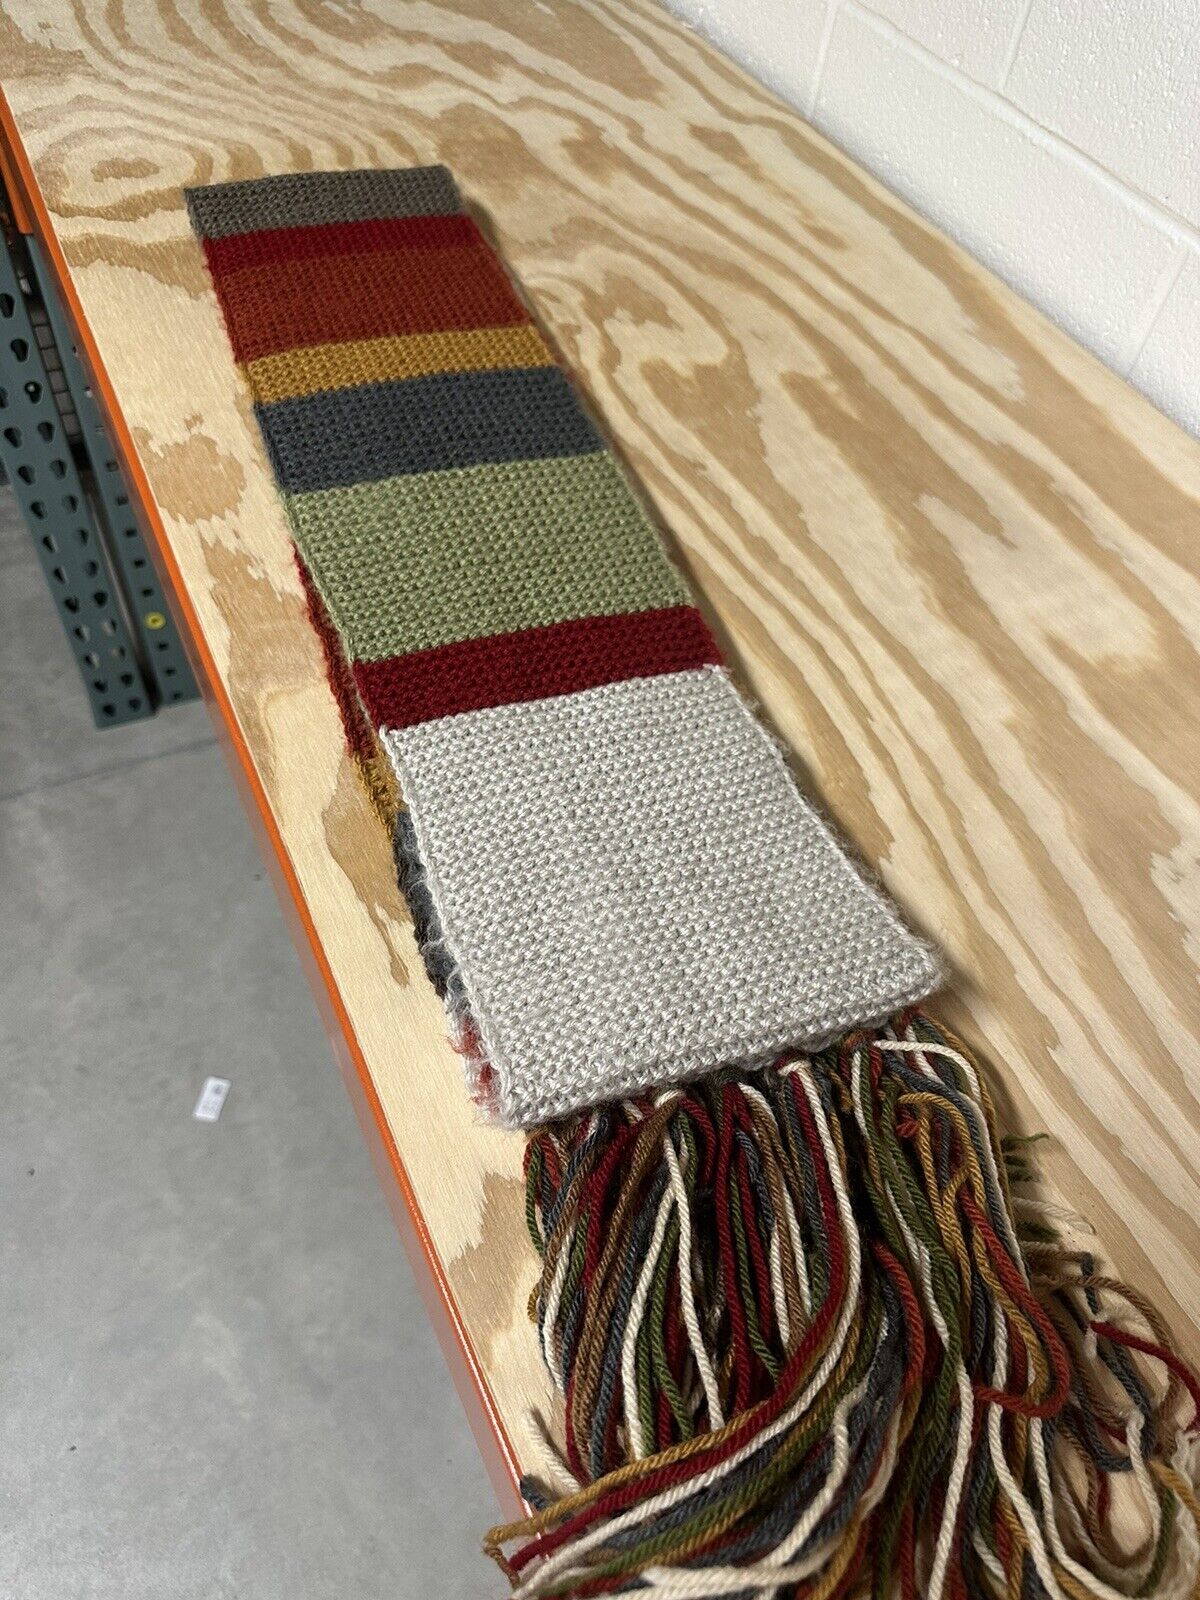 Doctor Who 4th Doctor Tom Baker Scarf 11.5 Foot Long Hand knit BBC